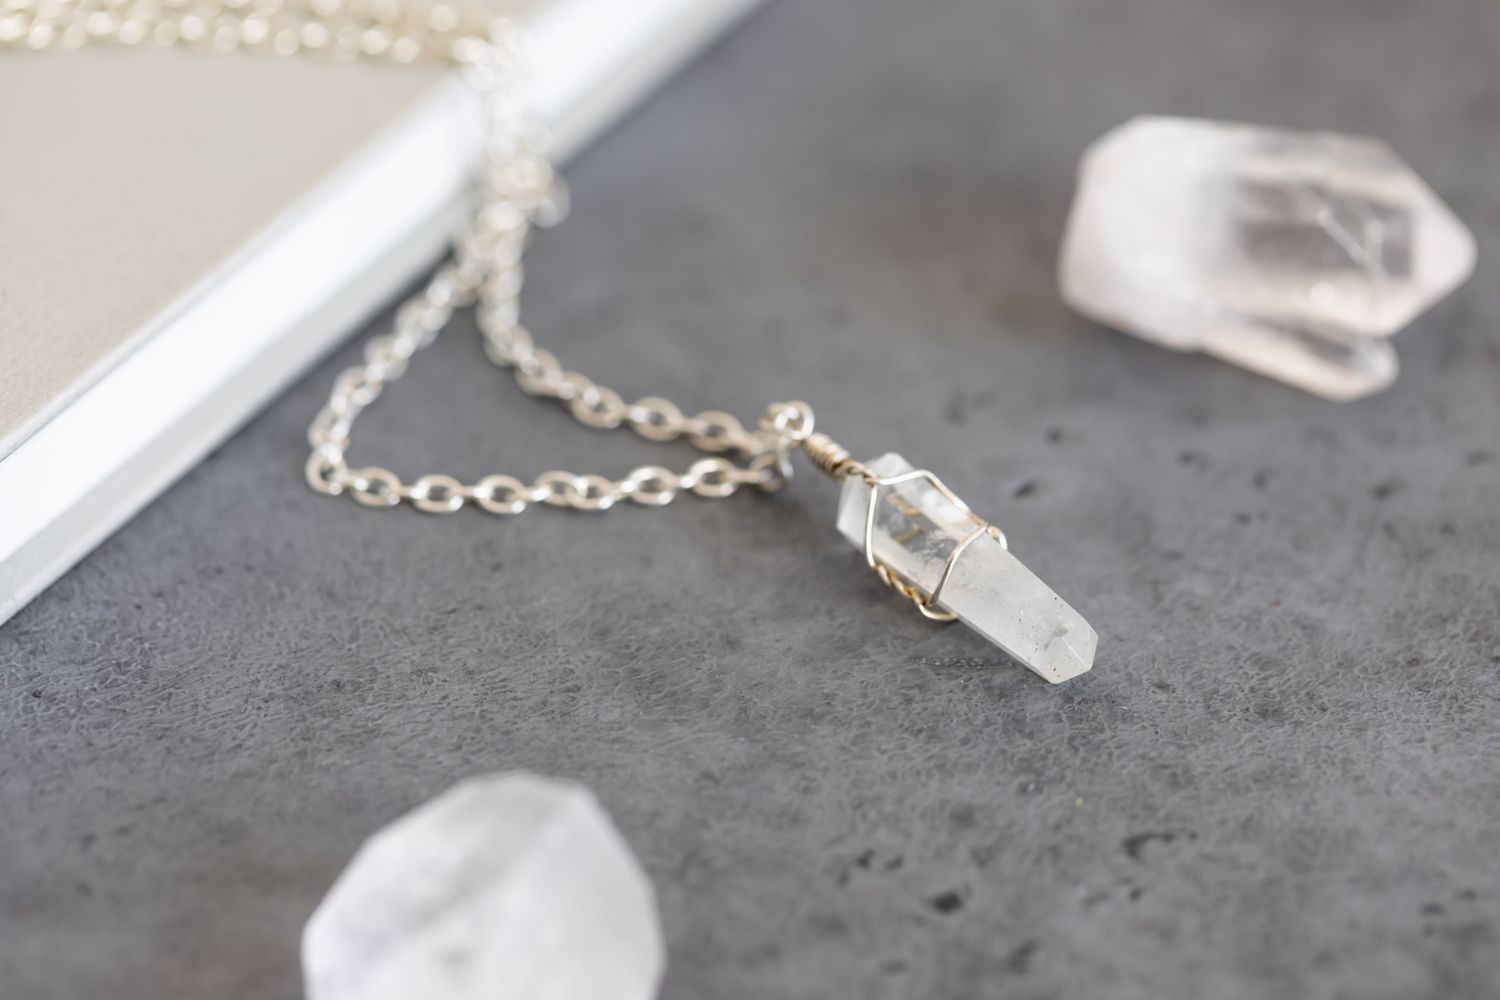 clear quartz crystals and jewelry